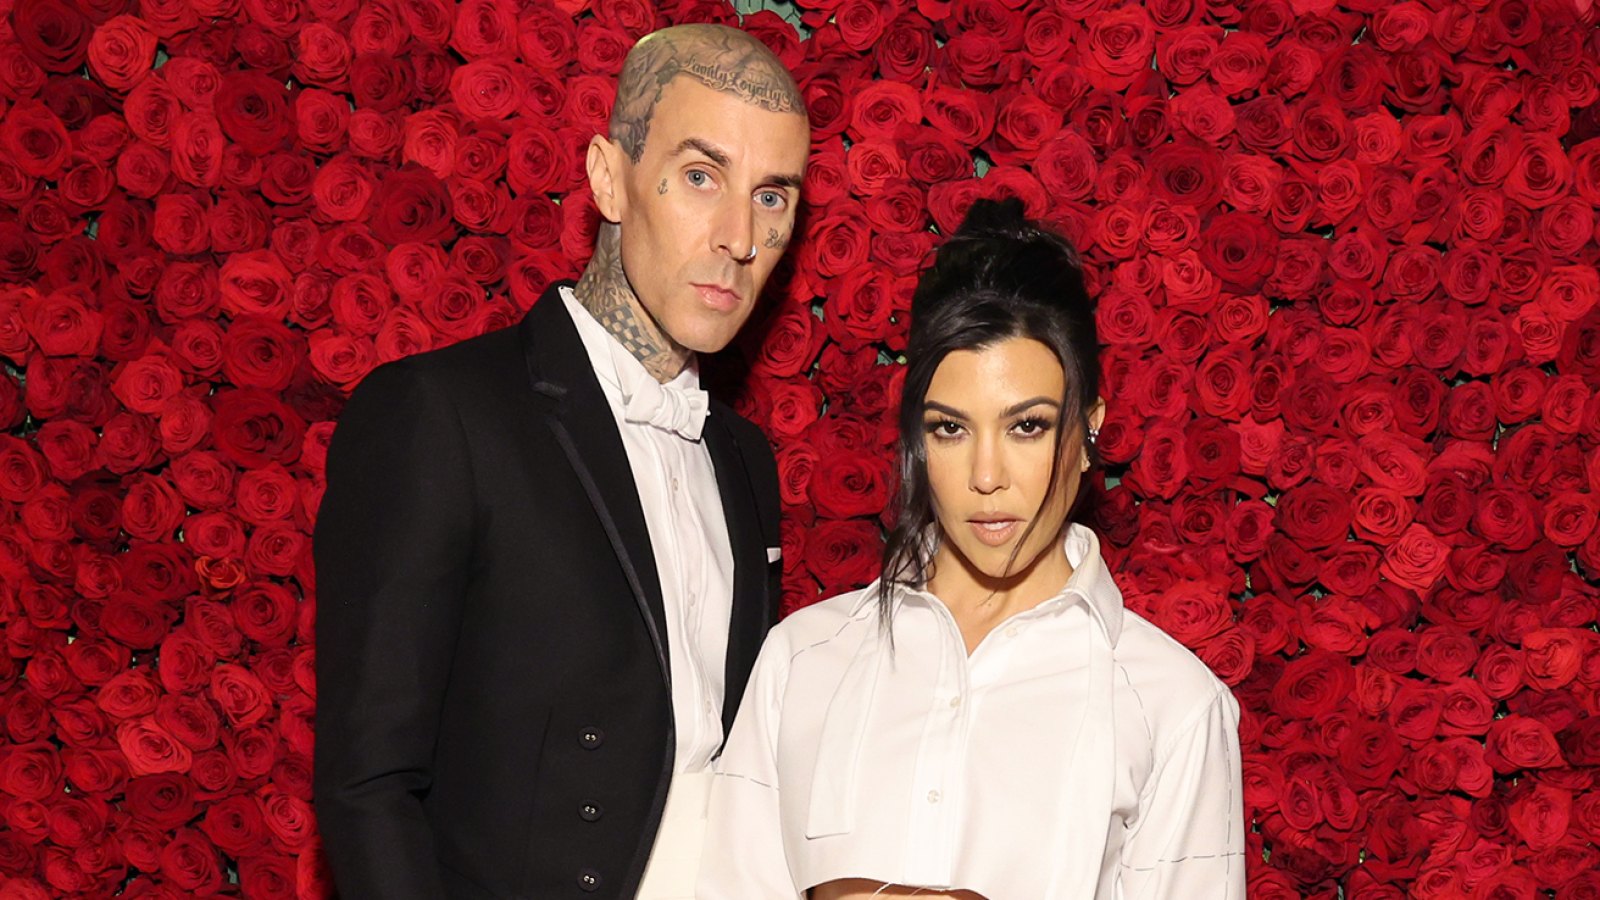 Travis Barker and Kourtney Kardashian hold hands and pose in front of a wall of red roses at the Met Gala